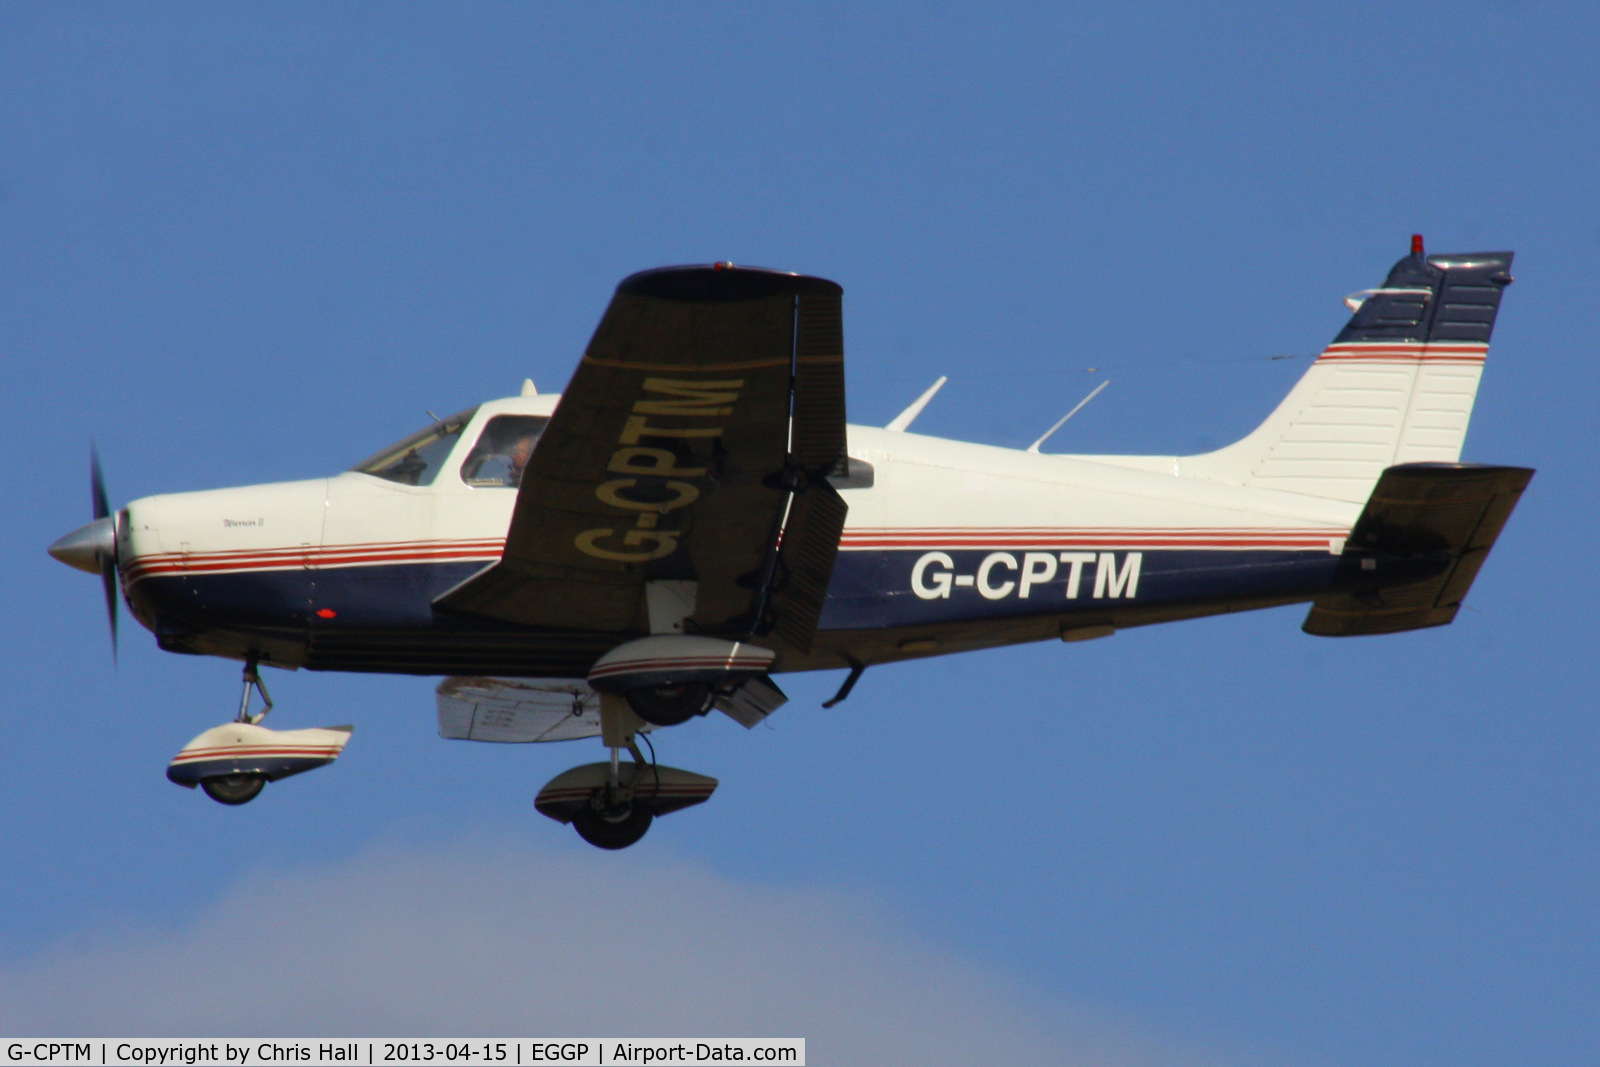 G-CPTM, 1977 Piper PA-28-151 Cherokee Warrior C/N 28-7715012, privately owned